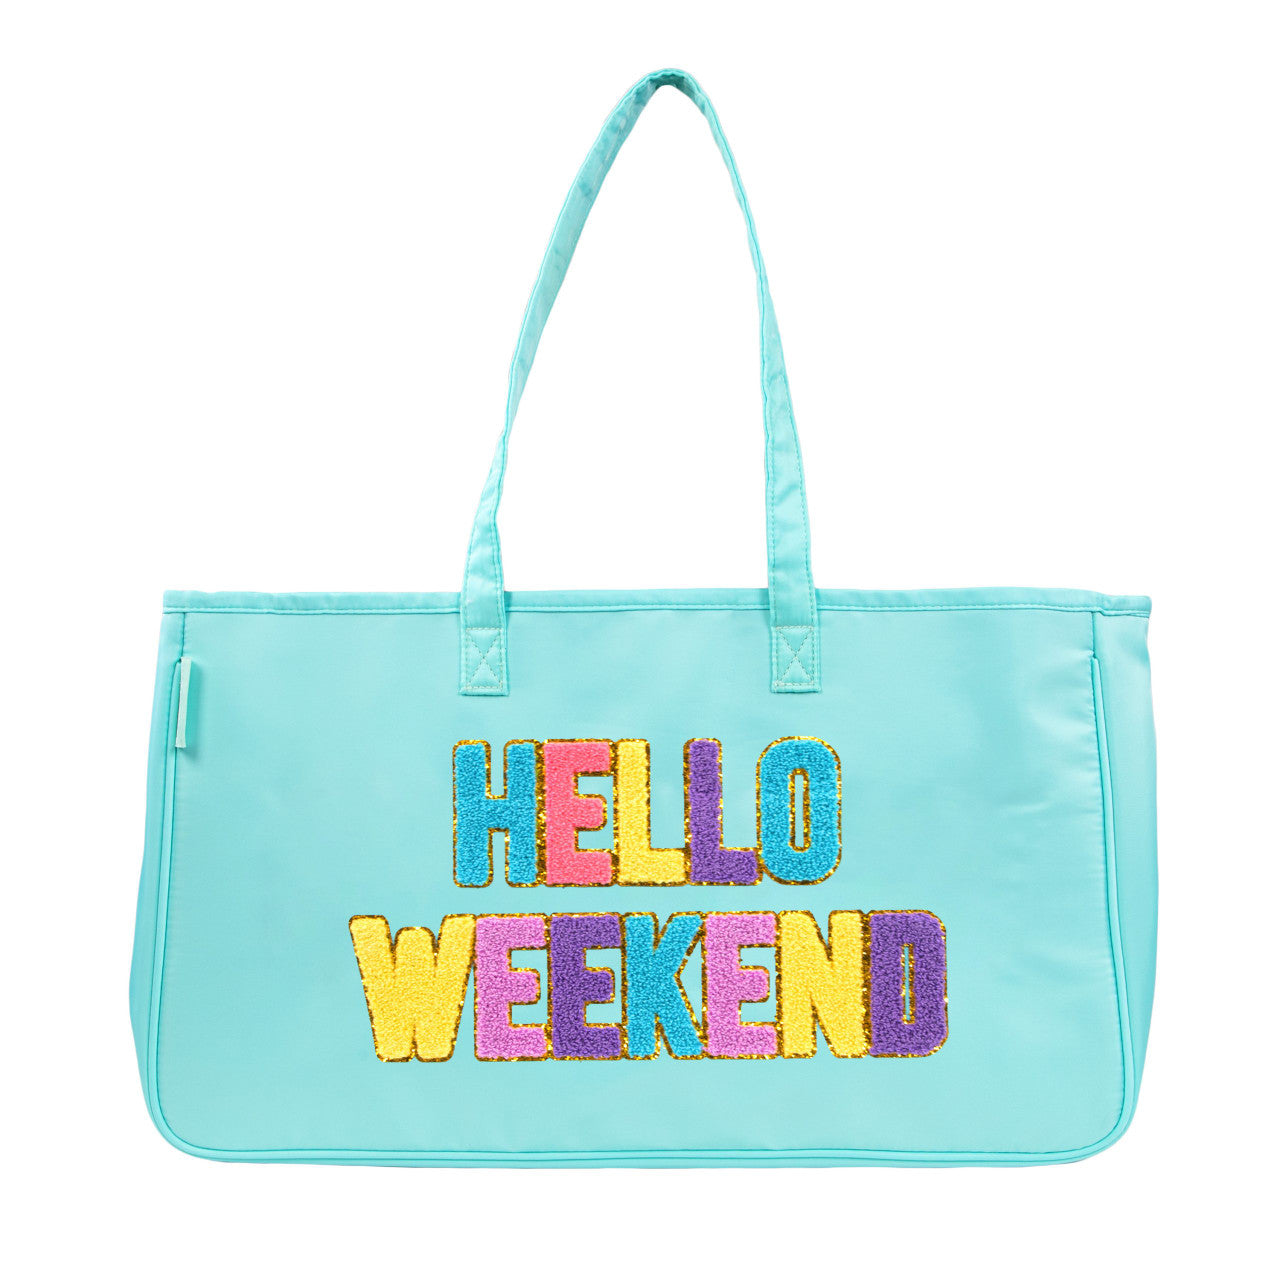 Hello Weekend Sparkle Tote Bag